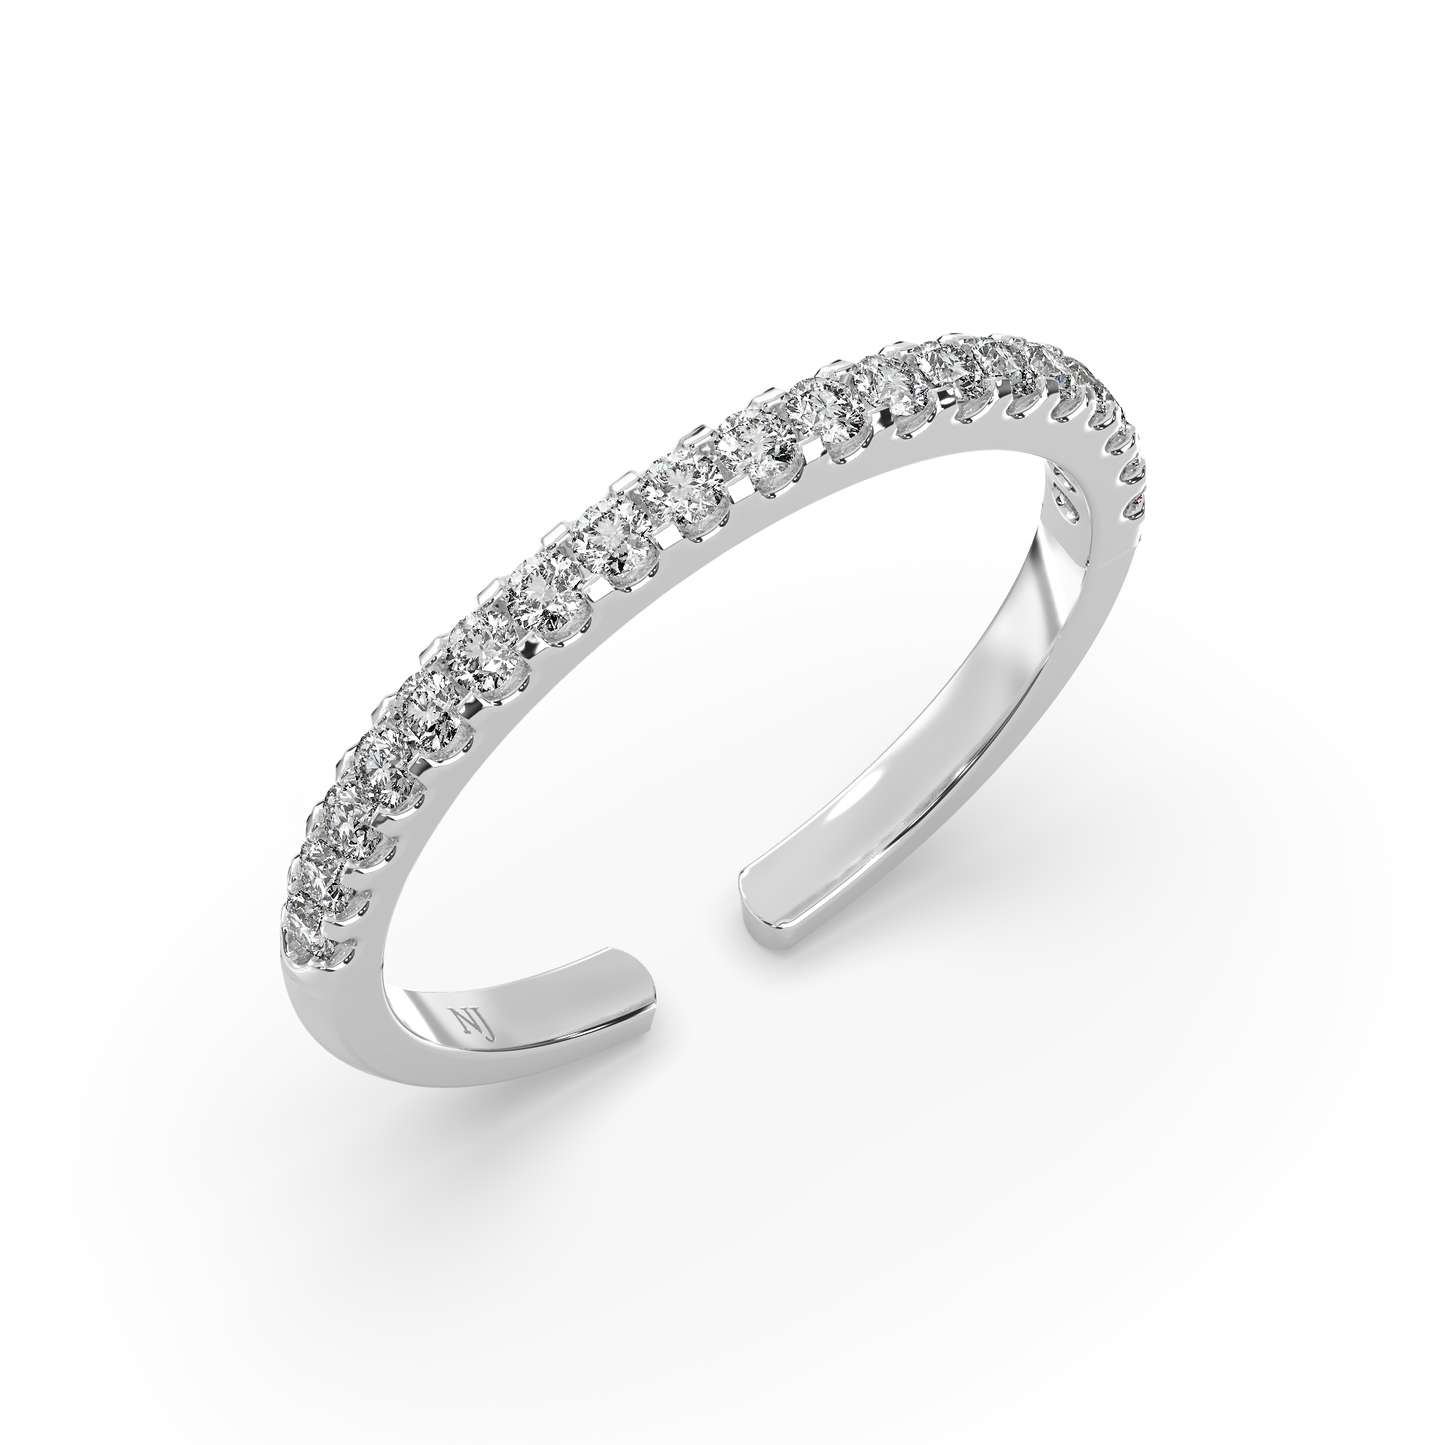 Silver Classic Couple Band (FREE SIZE)